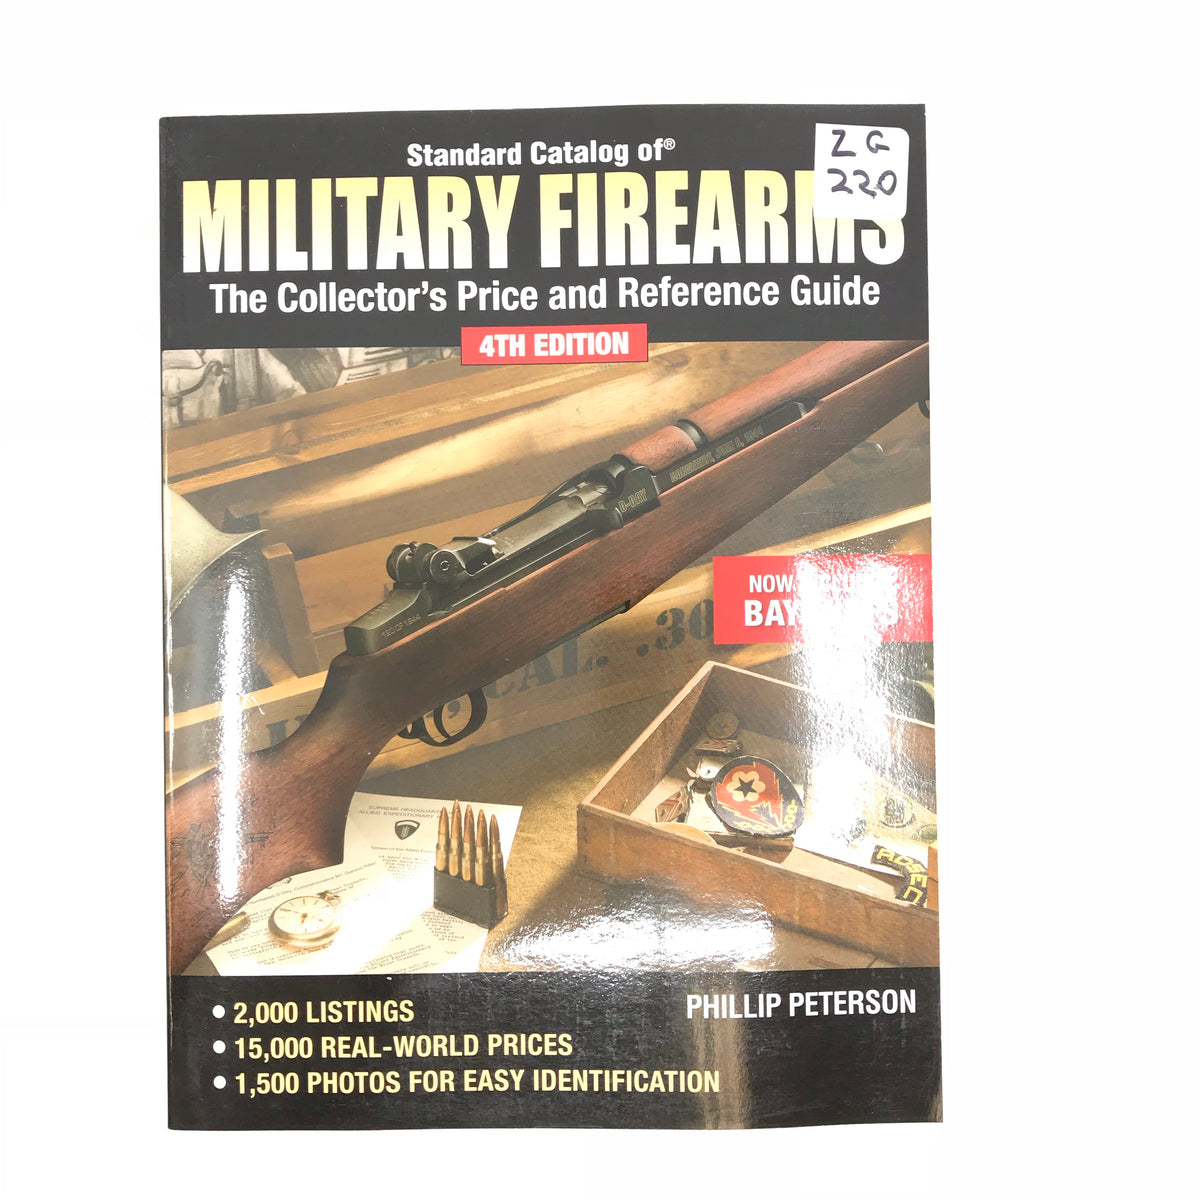 Standard Catalog of Military Firearms 4th ed